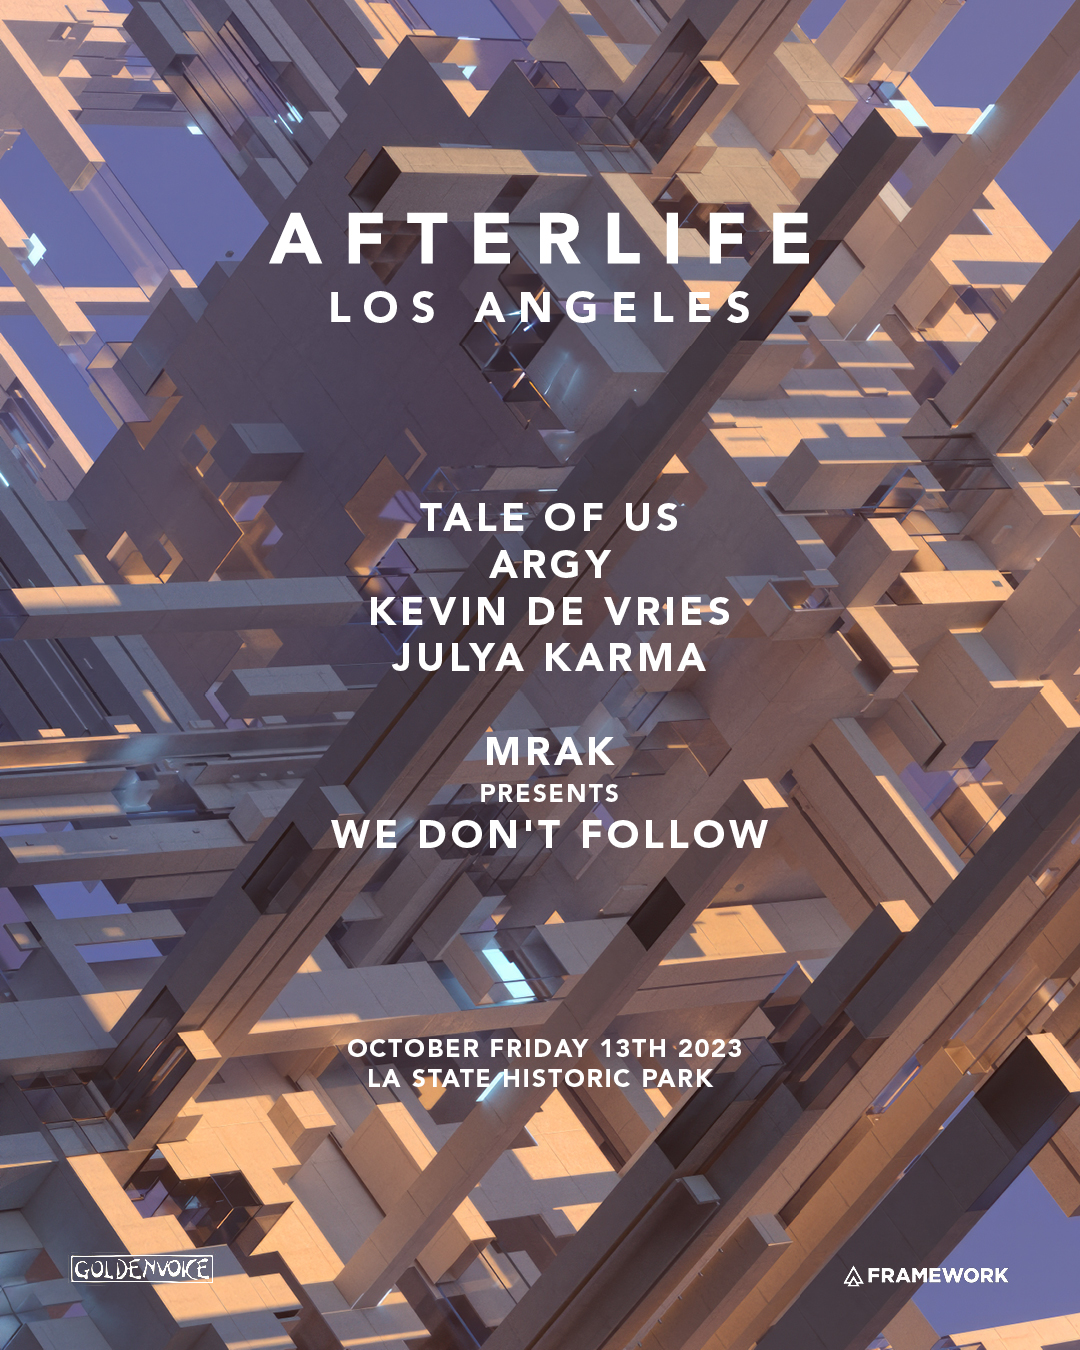 What is Afterlife, and Why is Afterlife LA a Big Deal?